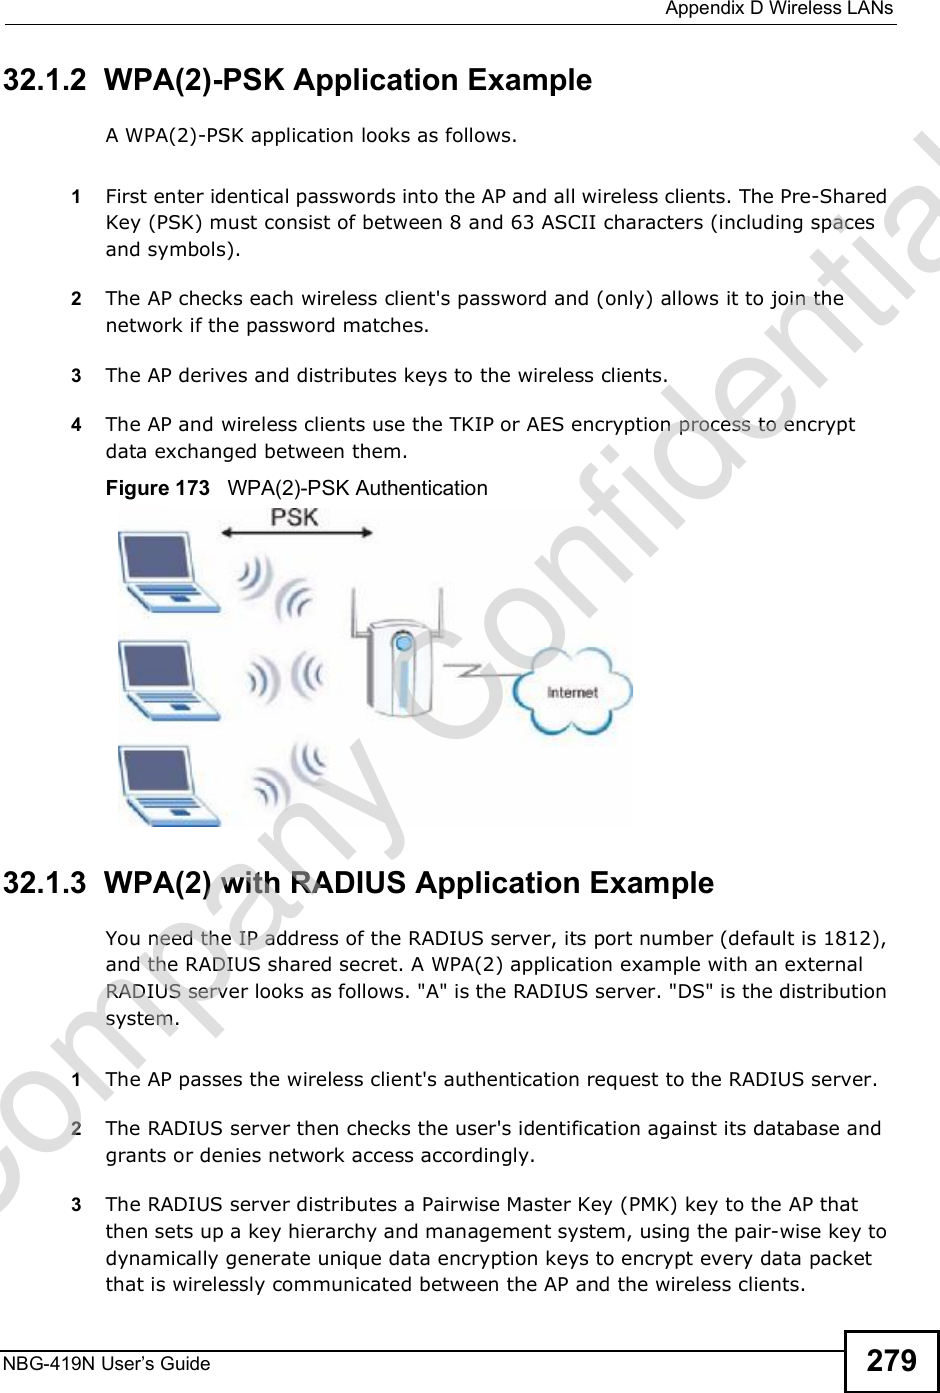  Appendix DWireless LANsNBG-419N User s Guide 27932.1.2  WPA(2)-PSK Application ExampleA WPA(2)-PSK application looks as follows.1First enter identical passwords into the AP and all wireless clients. The Pre-Shared Key (PSK) must consist of between 8 and 63 ASCII characters (including spaces and symbols).2The AP checks each wireless client&apos;s password and (only) allows it to join the network if the password matches.3The AP derives and distributes keys to the wireless clients.4The AP and wireless clients use the TKIP or AES encryption process to encrypt data exchanged between them.Figure 173   WPA(2)-PSK Authentication32.1.3  WPA(2) with RADIUS Application ExampleYou need the IP address of the RADIUS server, its port number (default is 1812), and the RADIUS shared secret. A WPA(2) application example with an external RADIUS server looks as follows. &quot;A&quot; is the RADIUS server. &quot;DS&quot; is the distribution system.1The AP passes the wireless client&apos;s authentication request to the RADIUS server.2The RADIUS server then checks the user&apos;s identification against its database and grants or denies network access accordingly.3The RADIUS server distributes a Pairwise Master Key (PMK) key to the AP that then sets up a key hierarchy and management system, using the pair-wise key to dynamically generate unique data encryption keys to encrypt every data packet that is wirelessly communicated between the AP and the wireless clients. Company Confidential